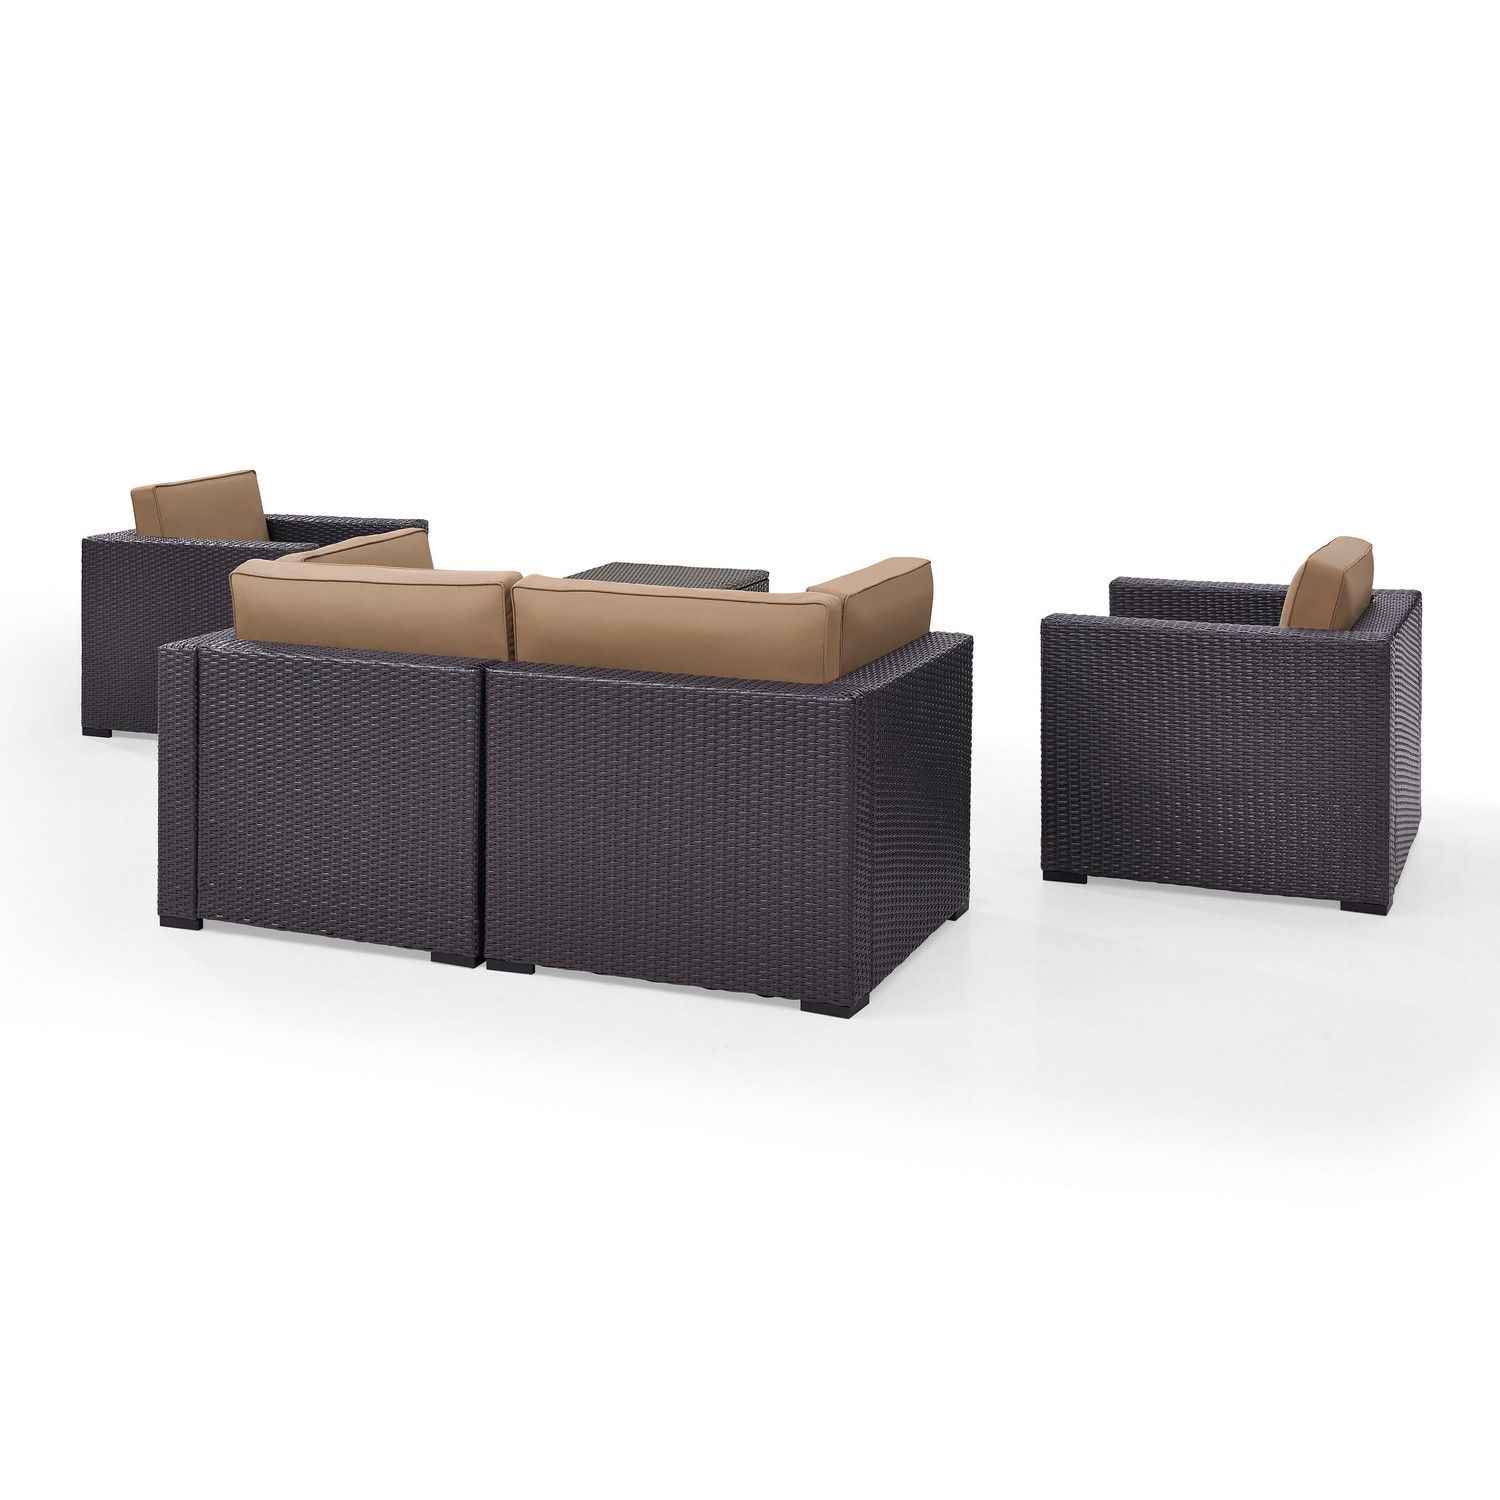 Crosley Biscayne 5-PC Outdoor Wicker Sectional Set - 2 Armchairs, 2 Corner Chair, Coffee Table - Mocha/Brown